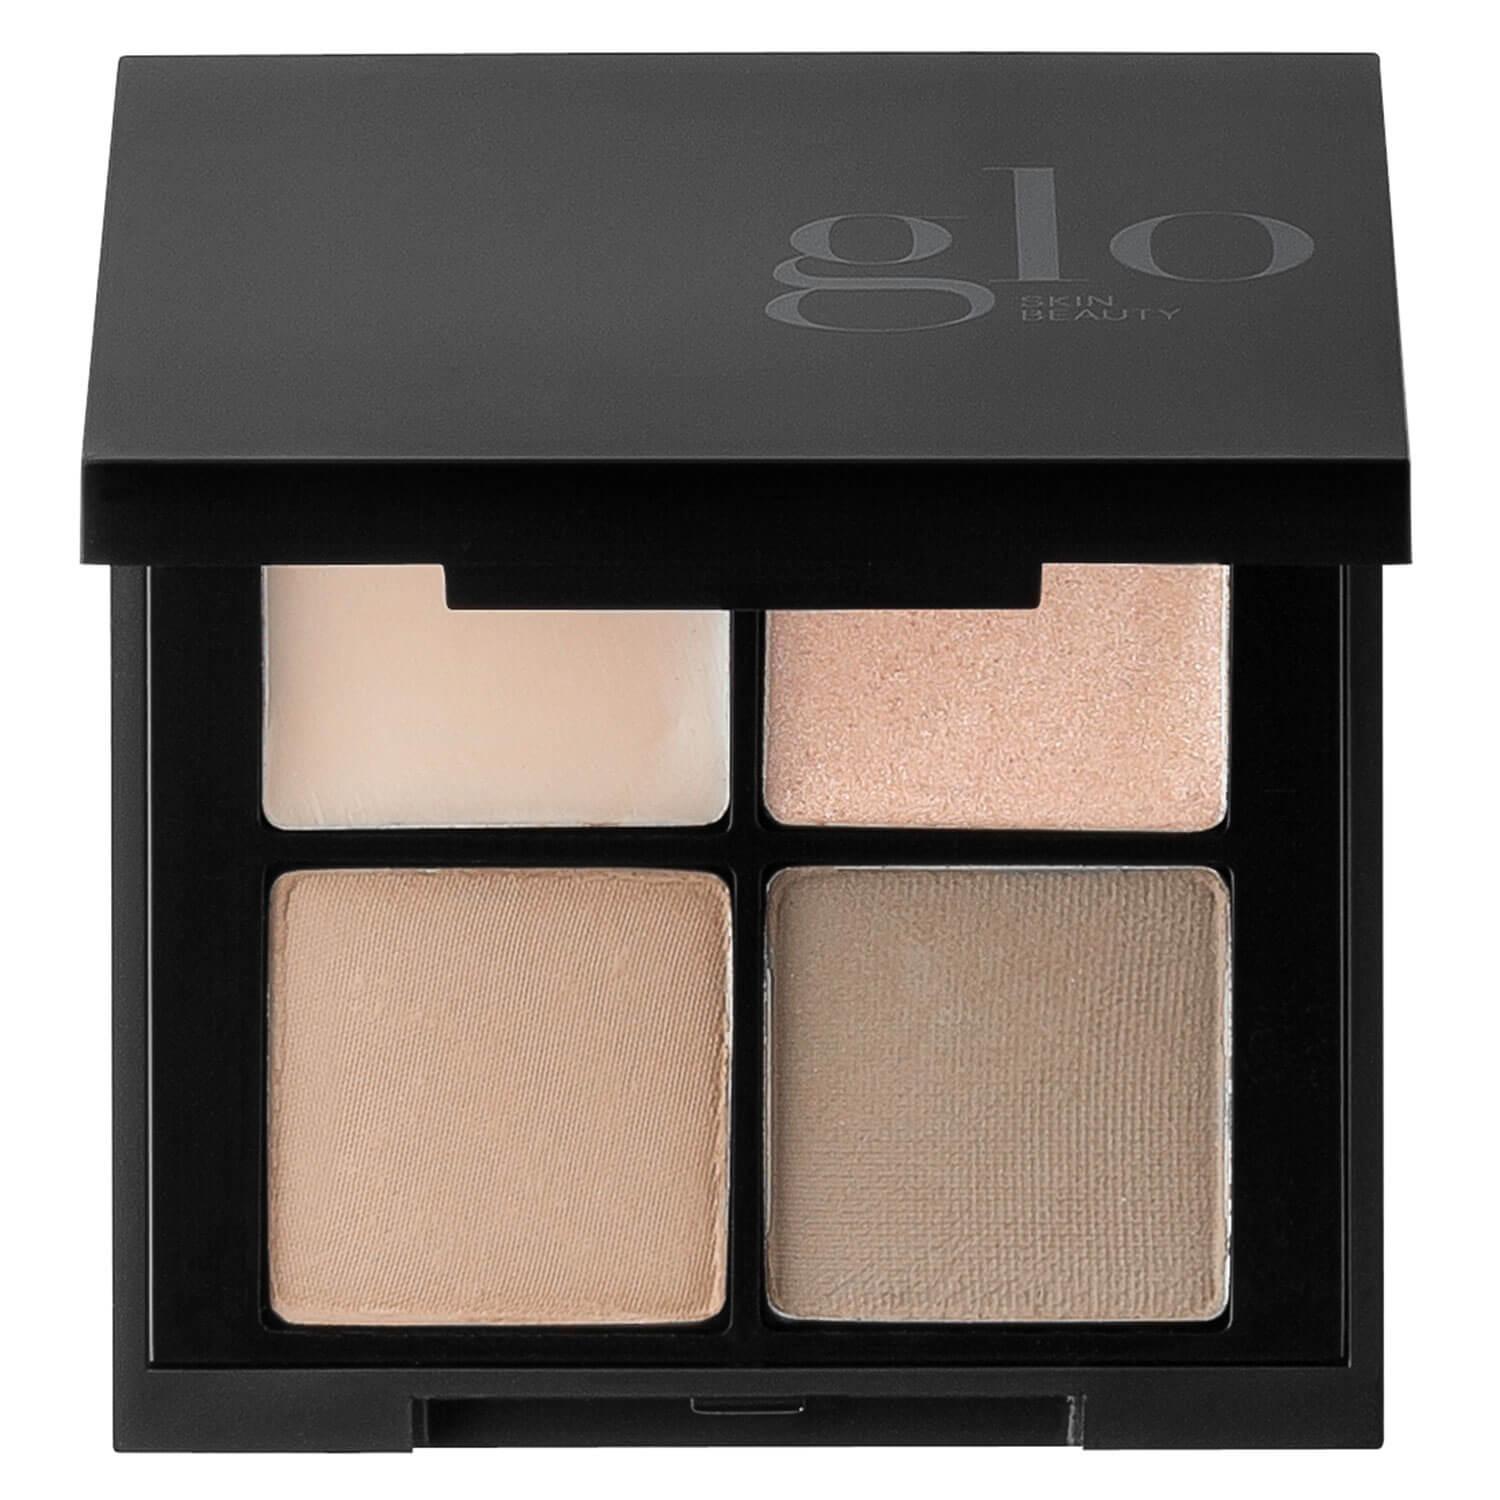 Glo Skin Beauty Brows - Brow Quad Taupe